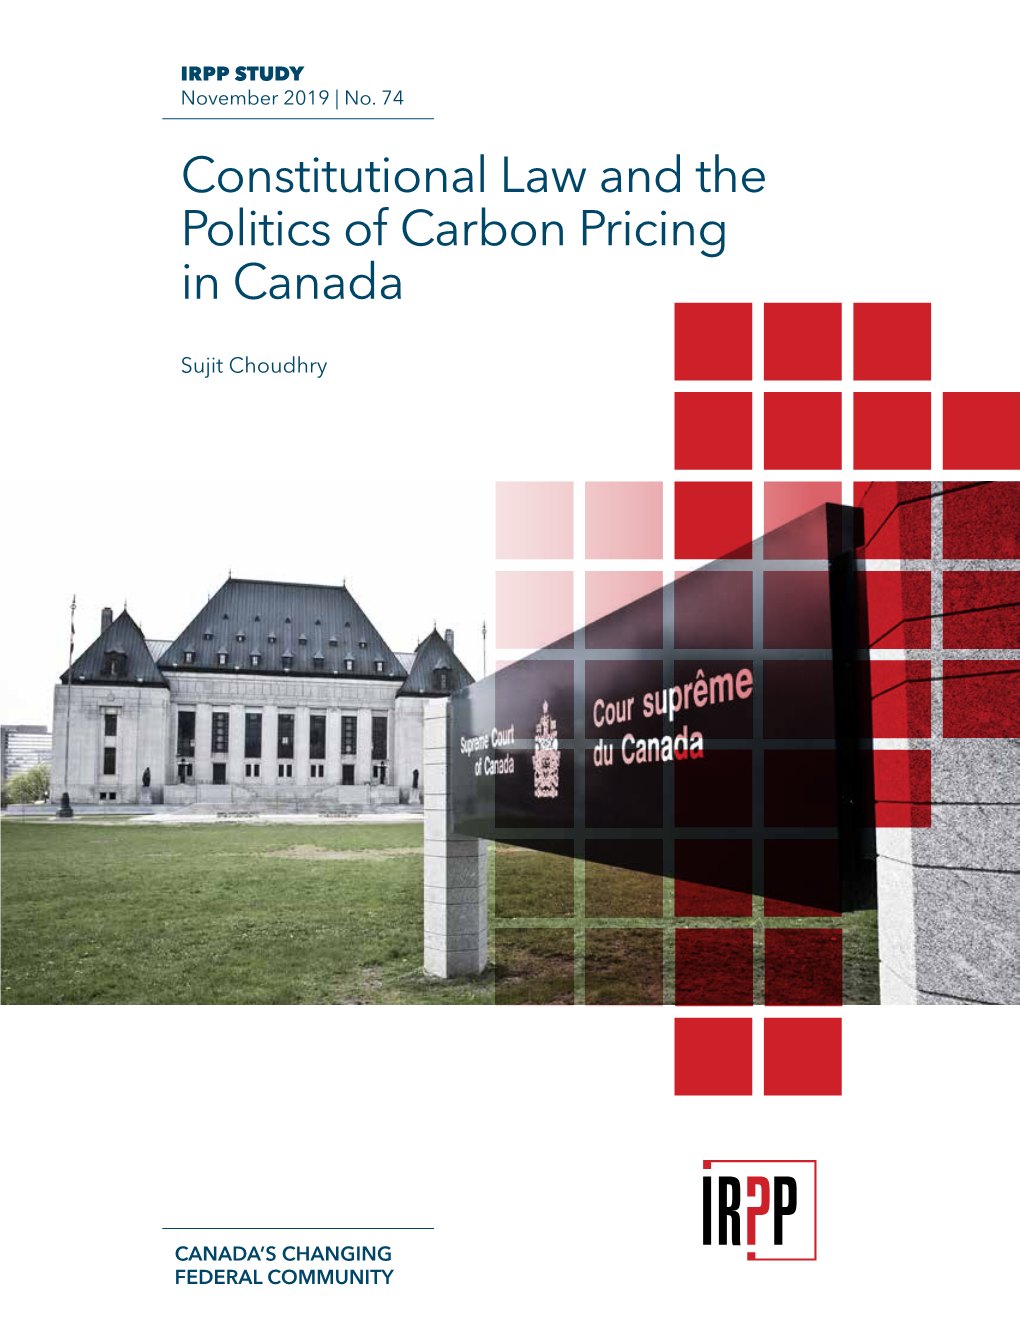 Constitutional Law and the Politics of Carbon Pricing in Canada